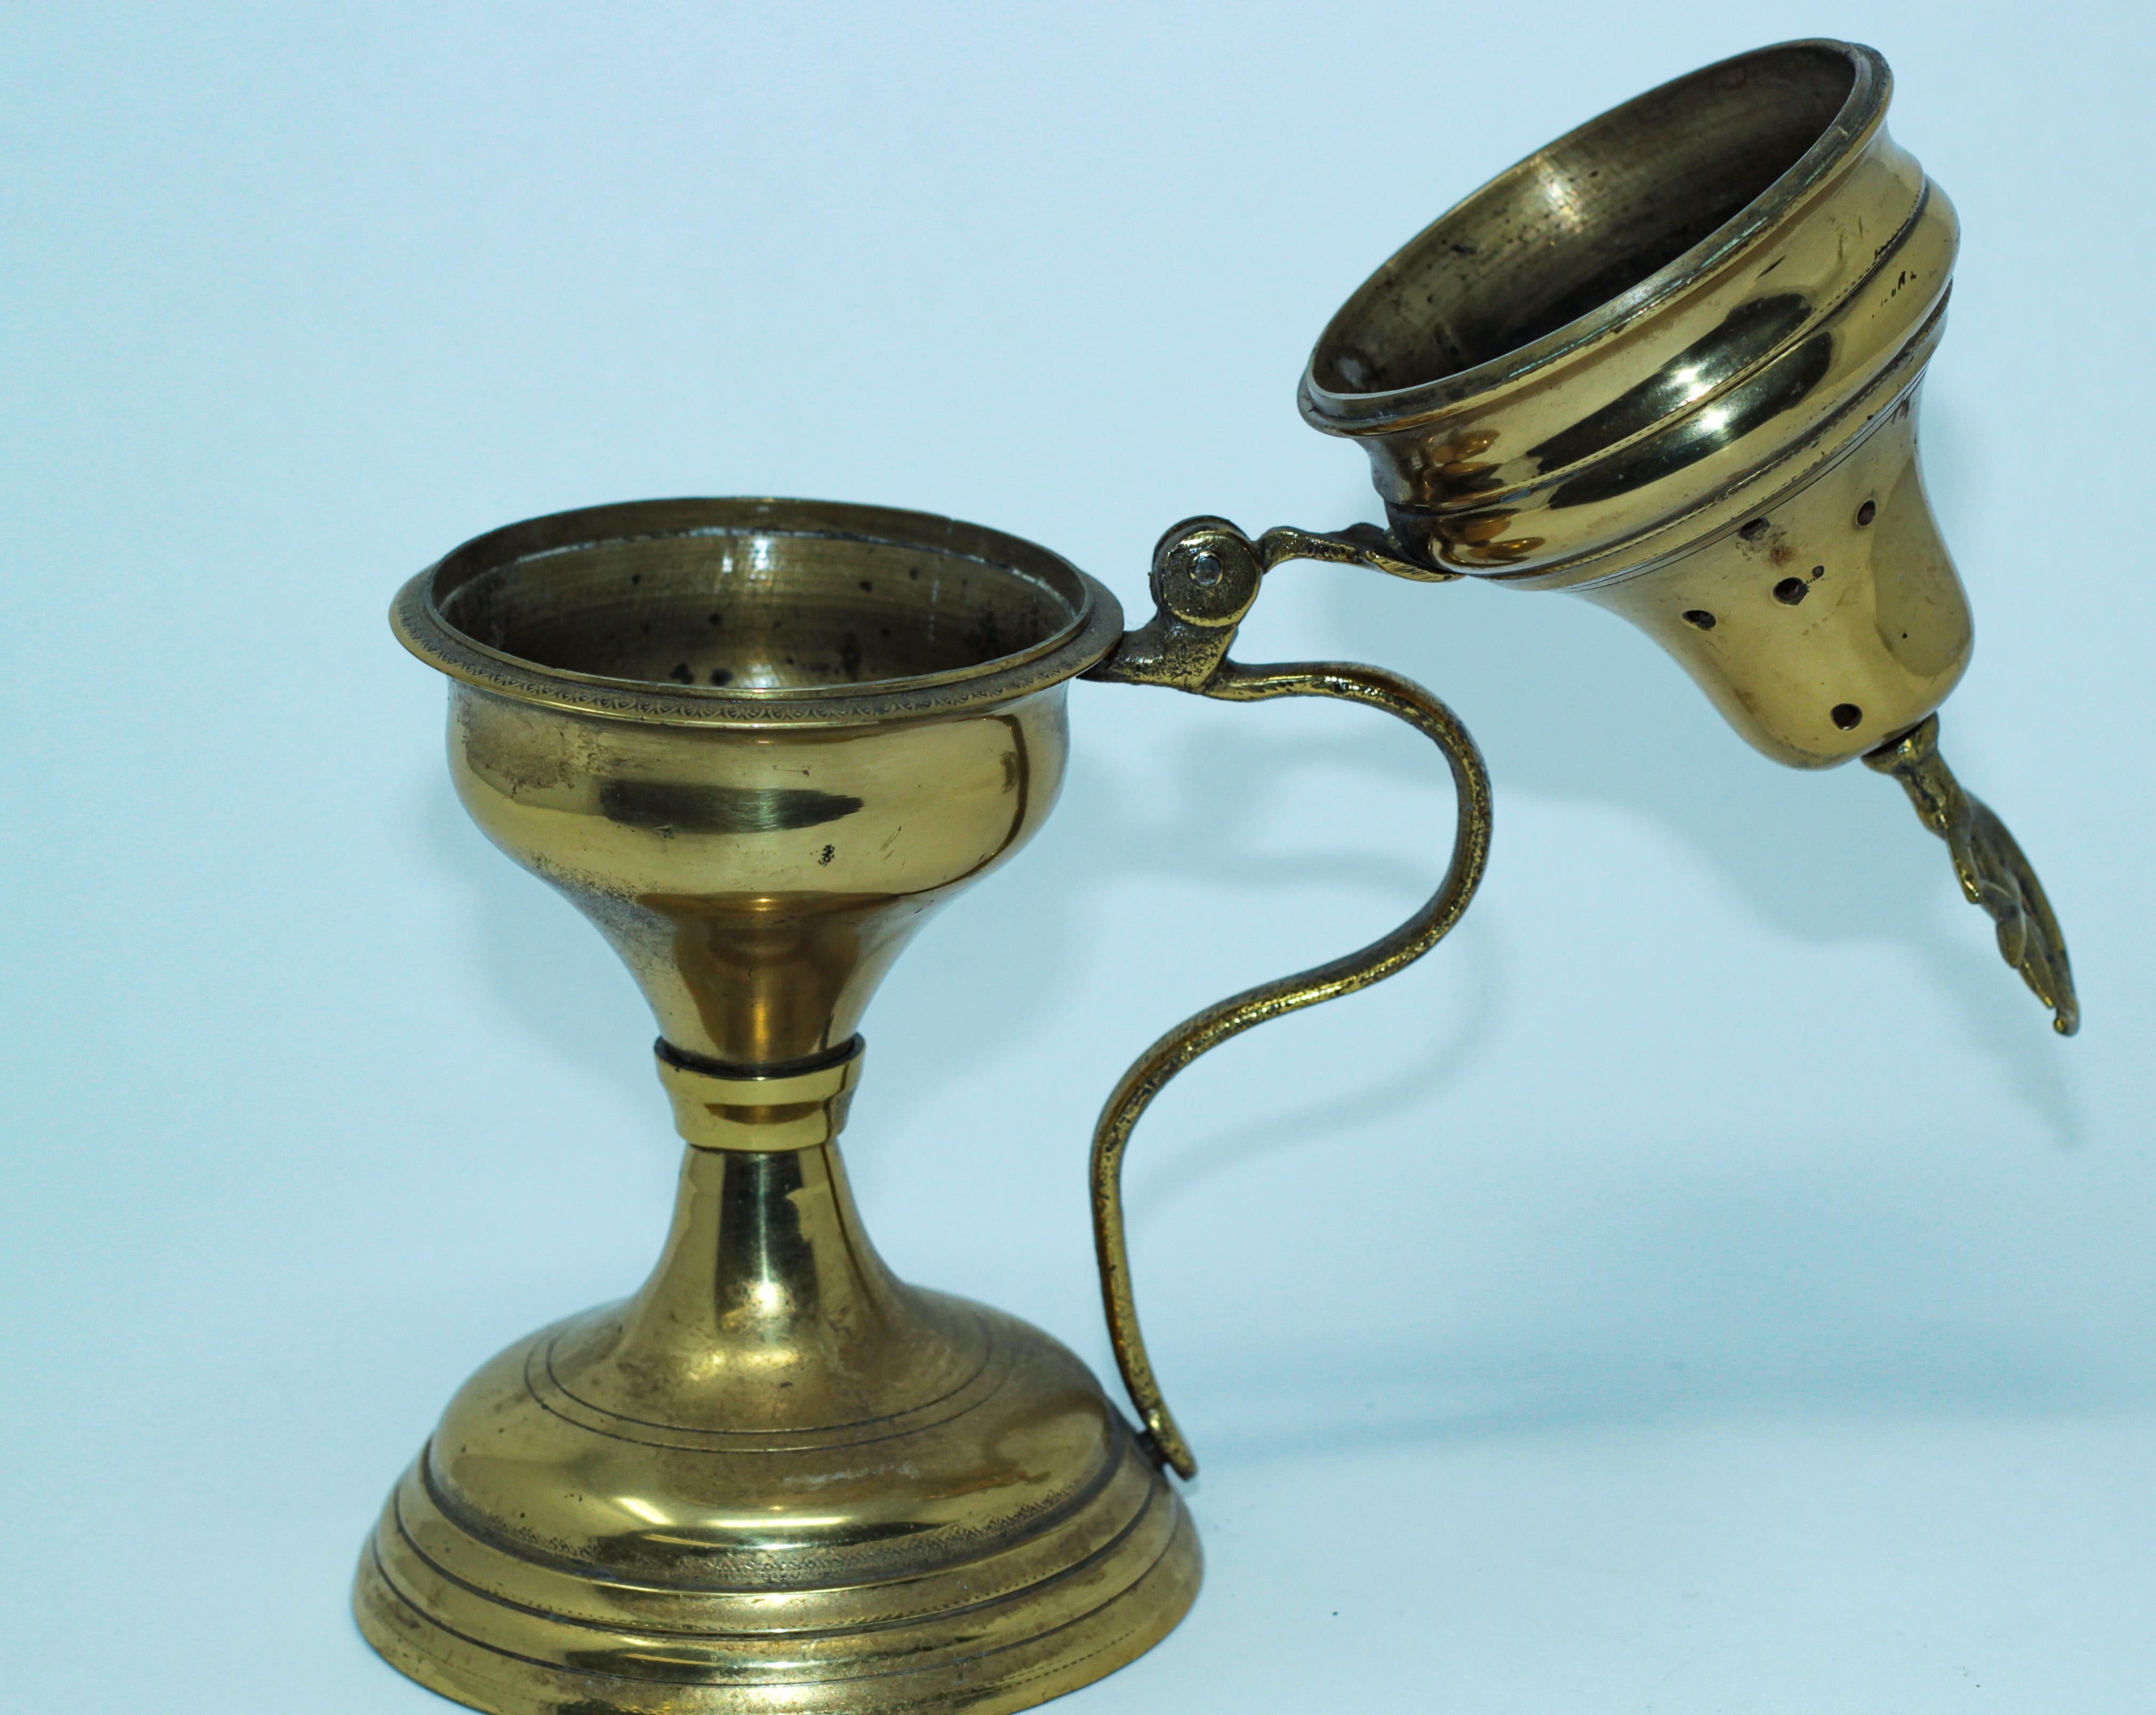 Turkish Polished Brass Incense Burner with Crescent Moon and Star Symbol